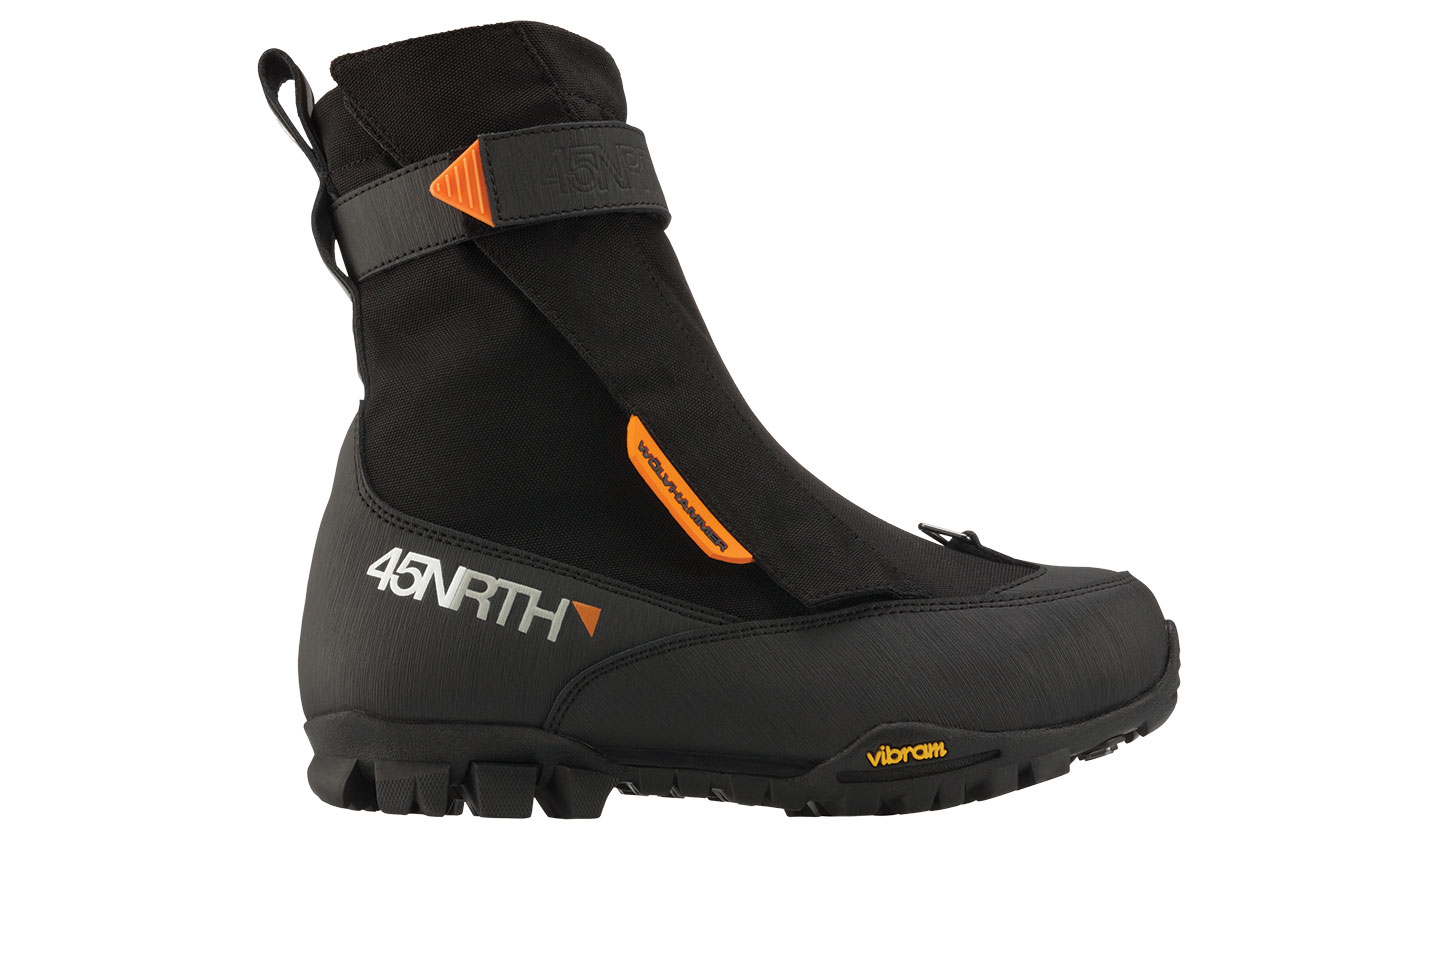 45 North Fasterkatt autumn/Spring Cycling Shoe. Undercover Shoes Boots. Boot out